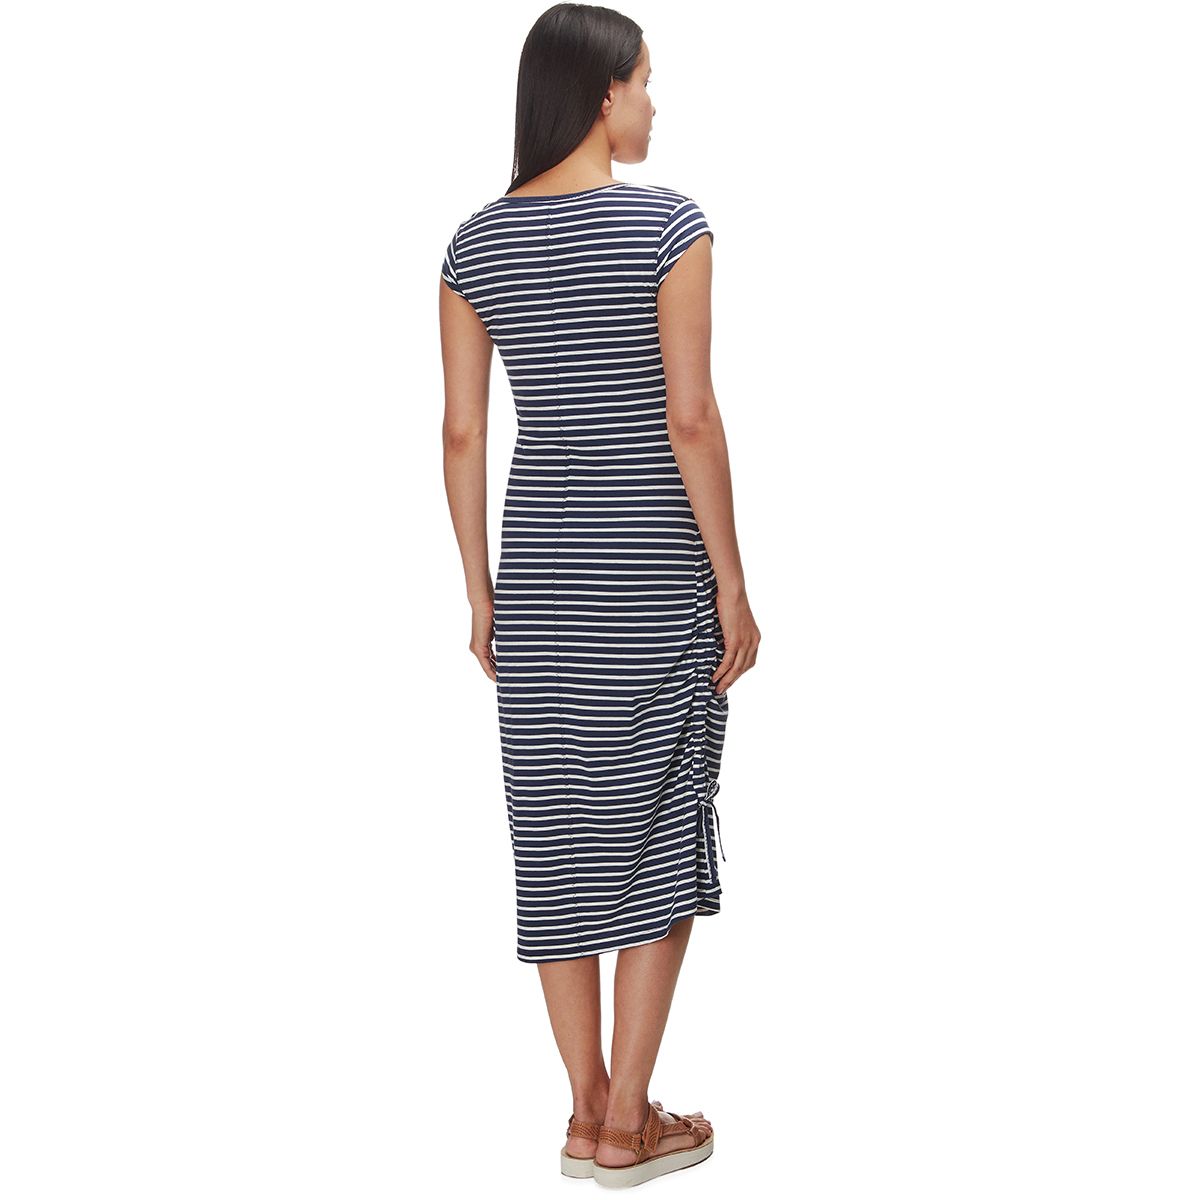 Toad&Co Muse Dress - Women's